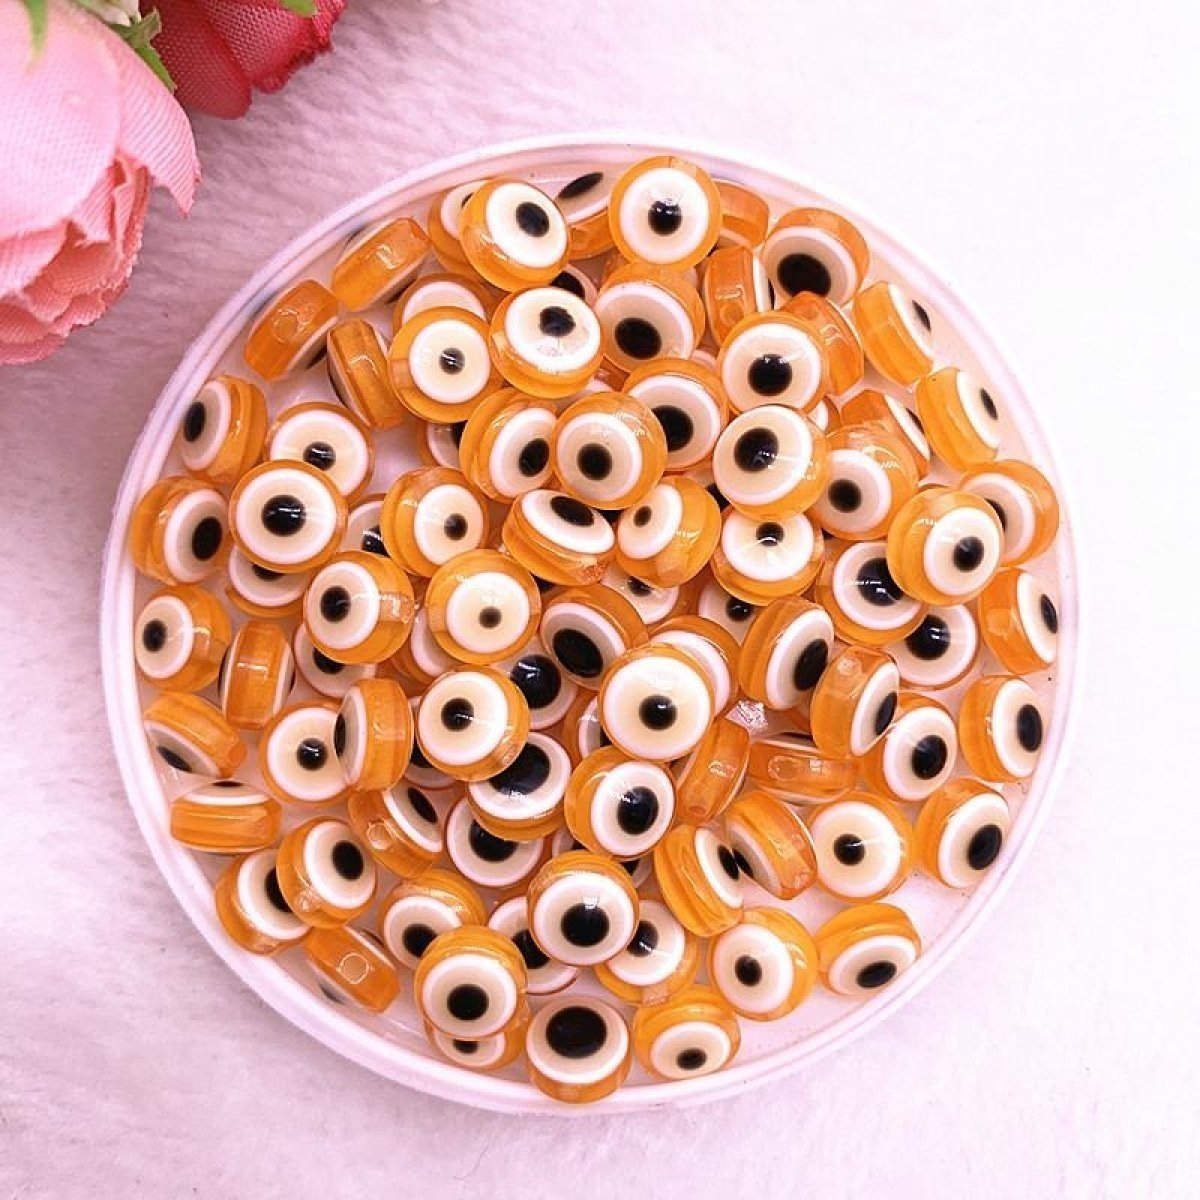 48pcs 8/10mm Resin Spacer Beads Double Sided Eyes for Jewelry Making DIY Bracelet Beads Flat Backing - White 8mm - - Asia Sell